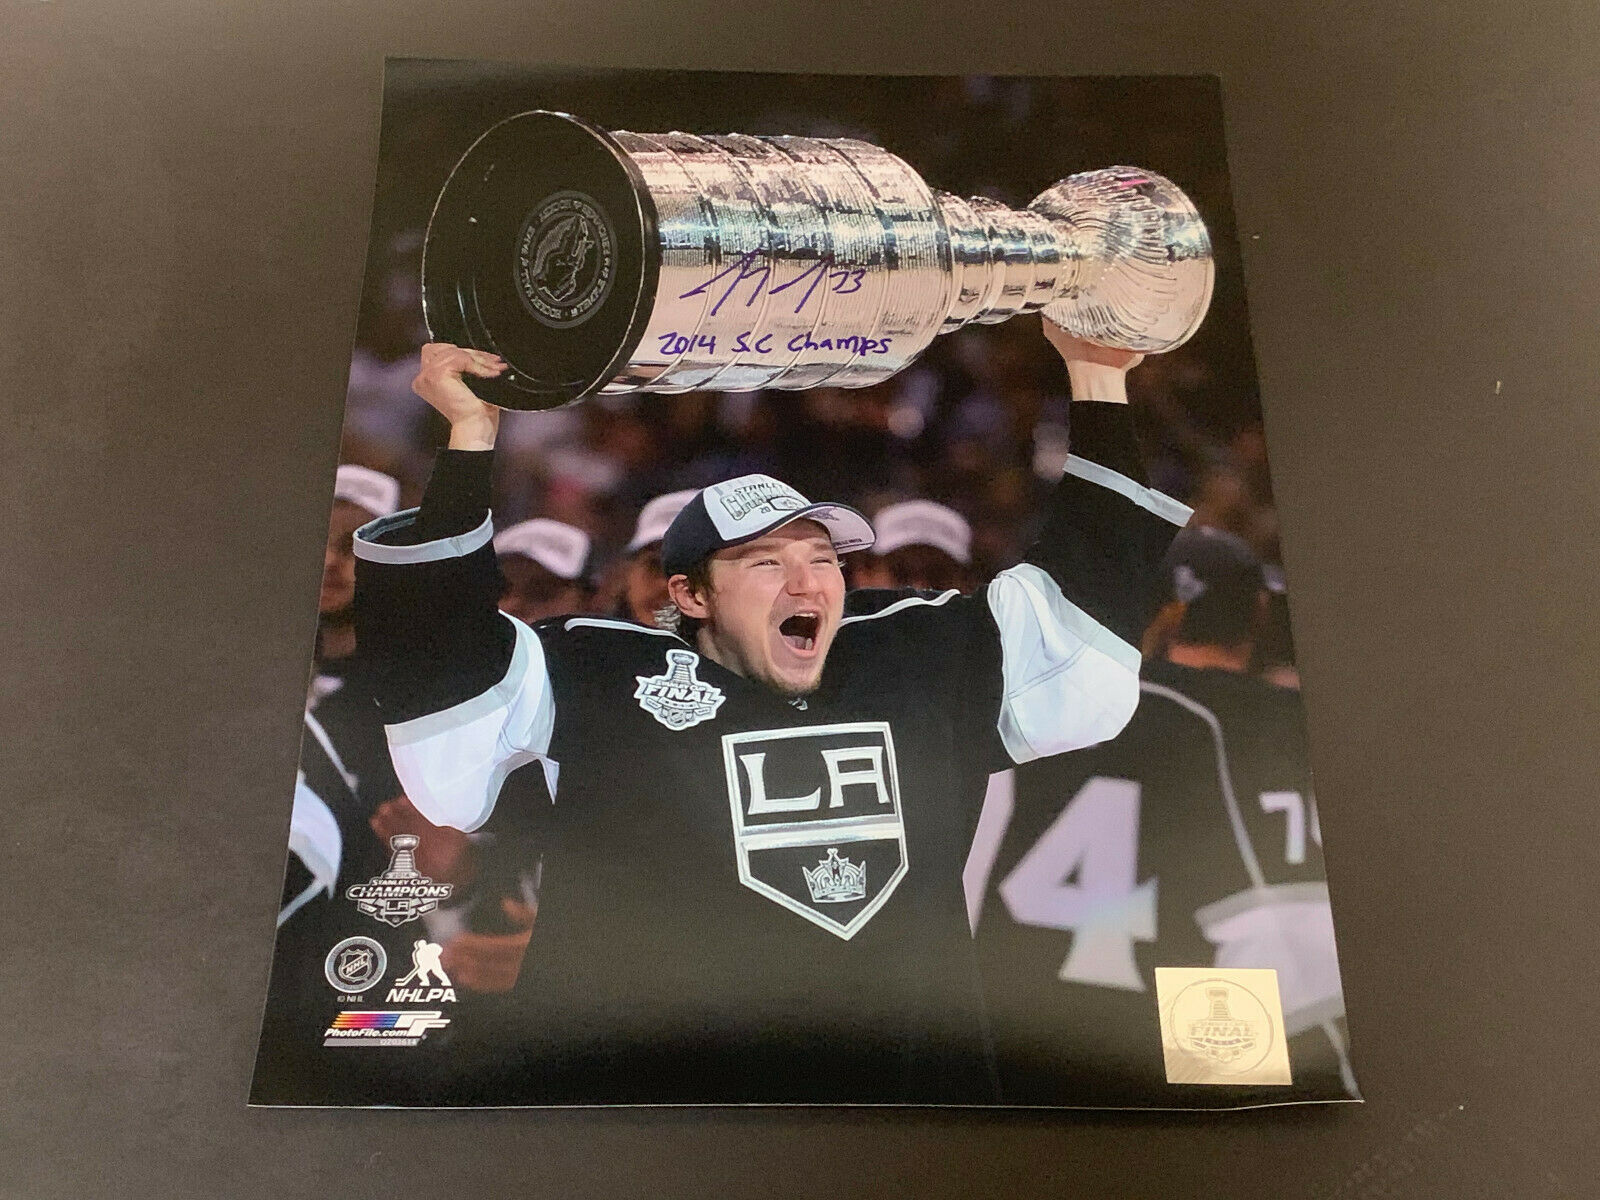 Tyler Toffoli Los Angeles Kings Autographed Signed 11x14 2014 SC CHamps